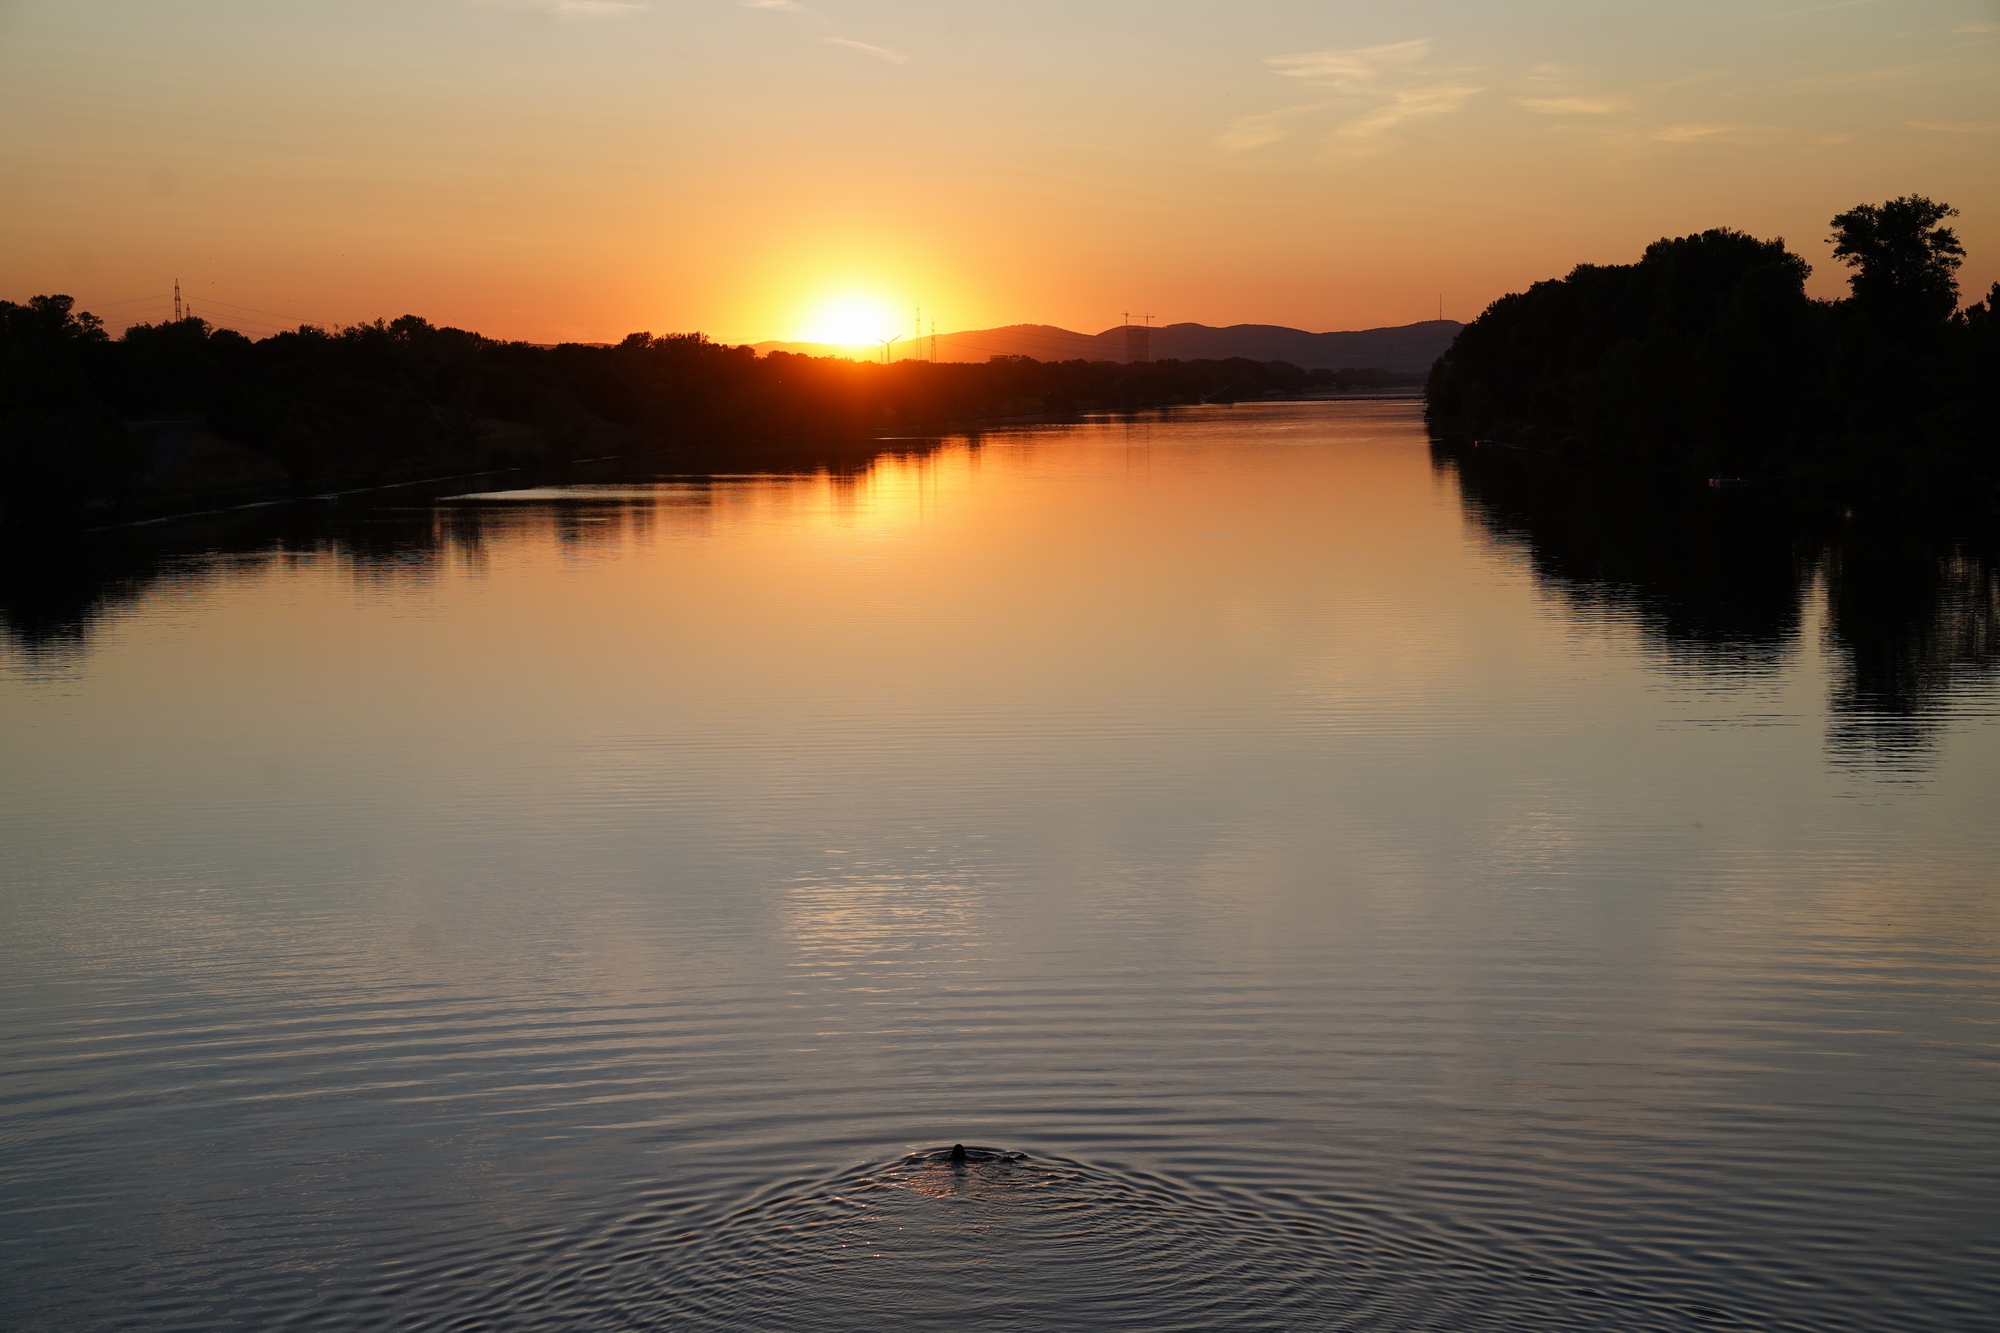 Sunset over New Danube with Mermaid